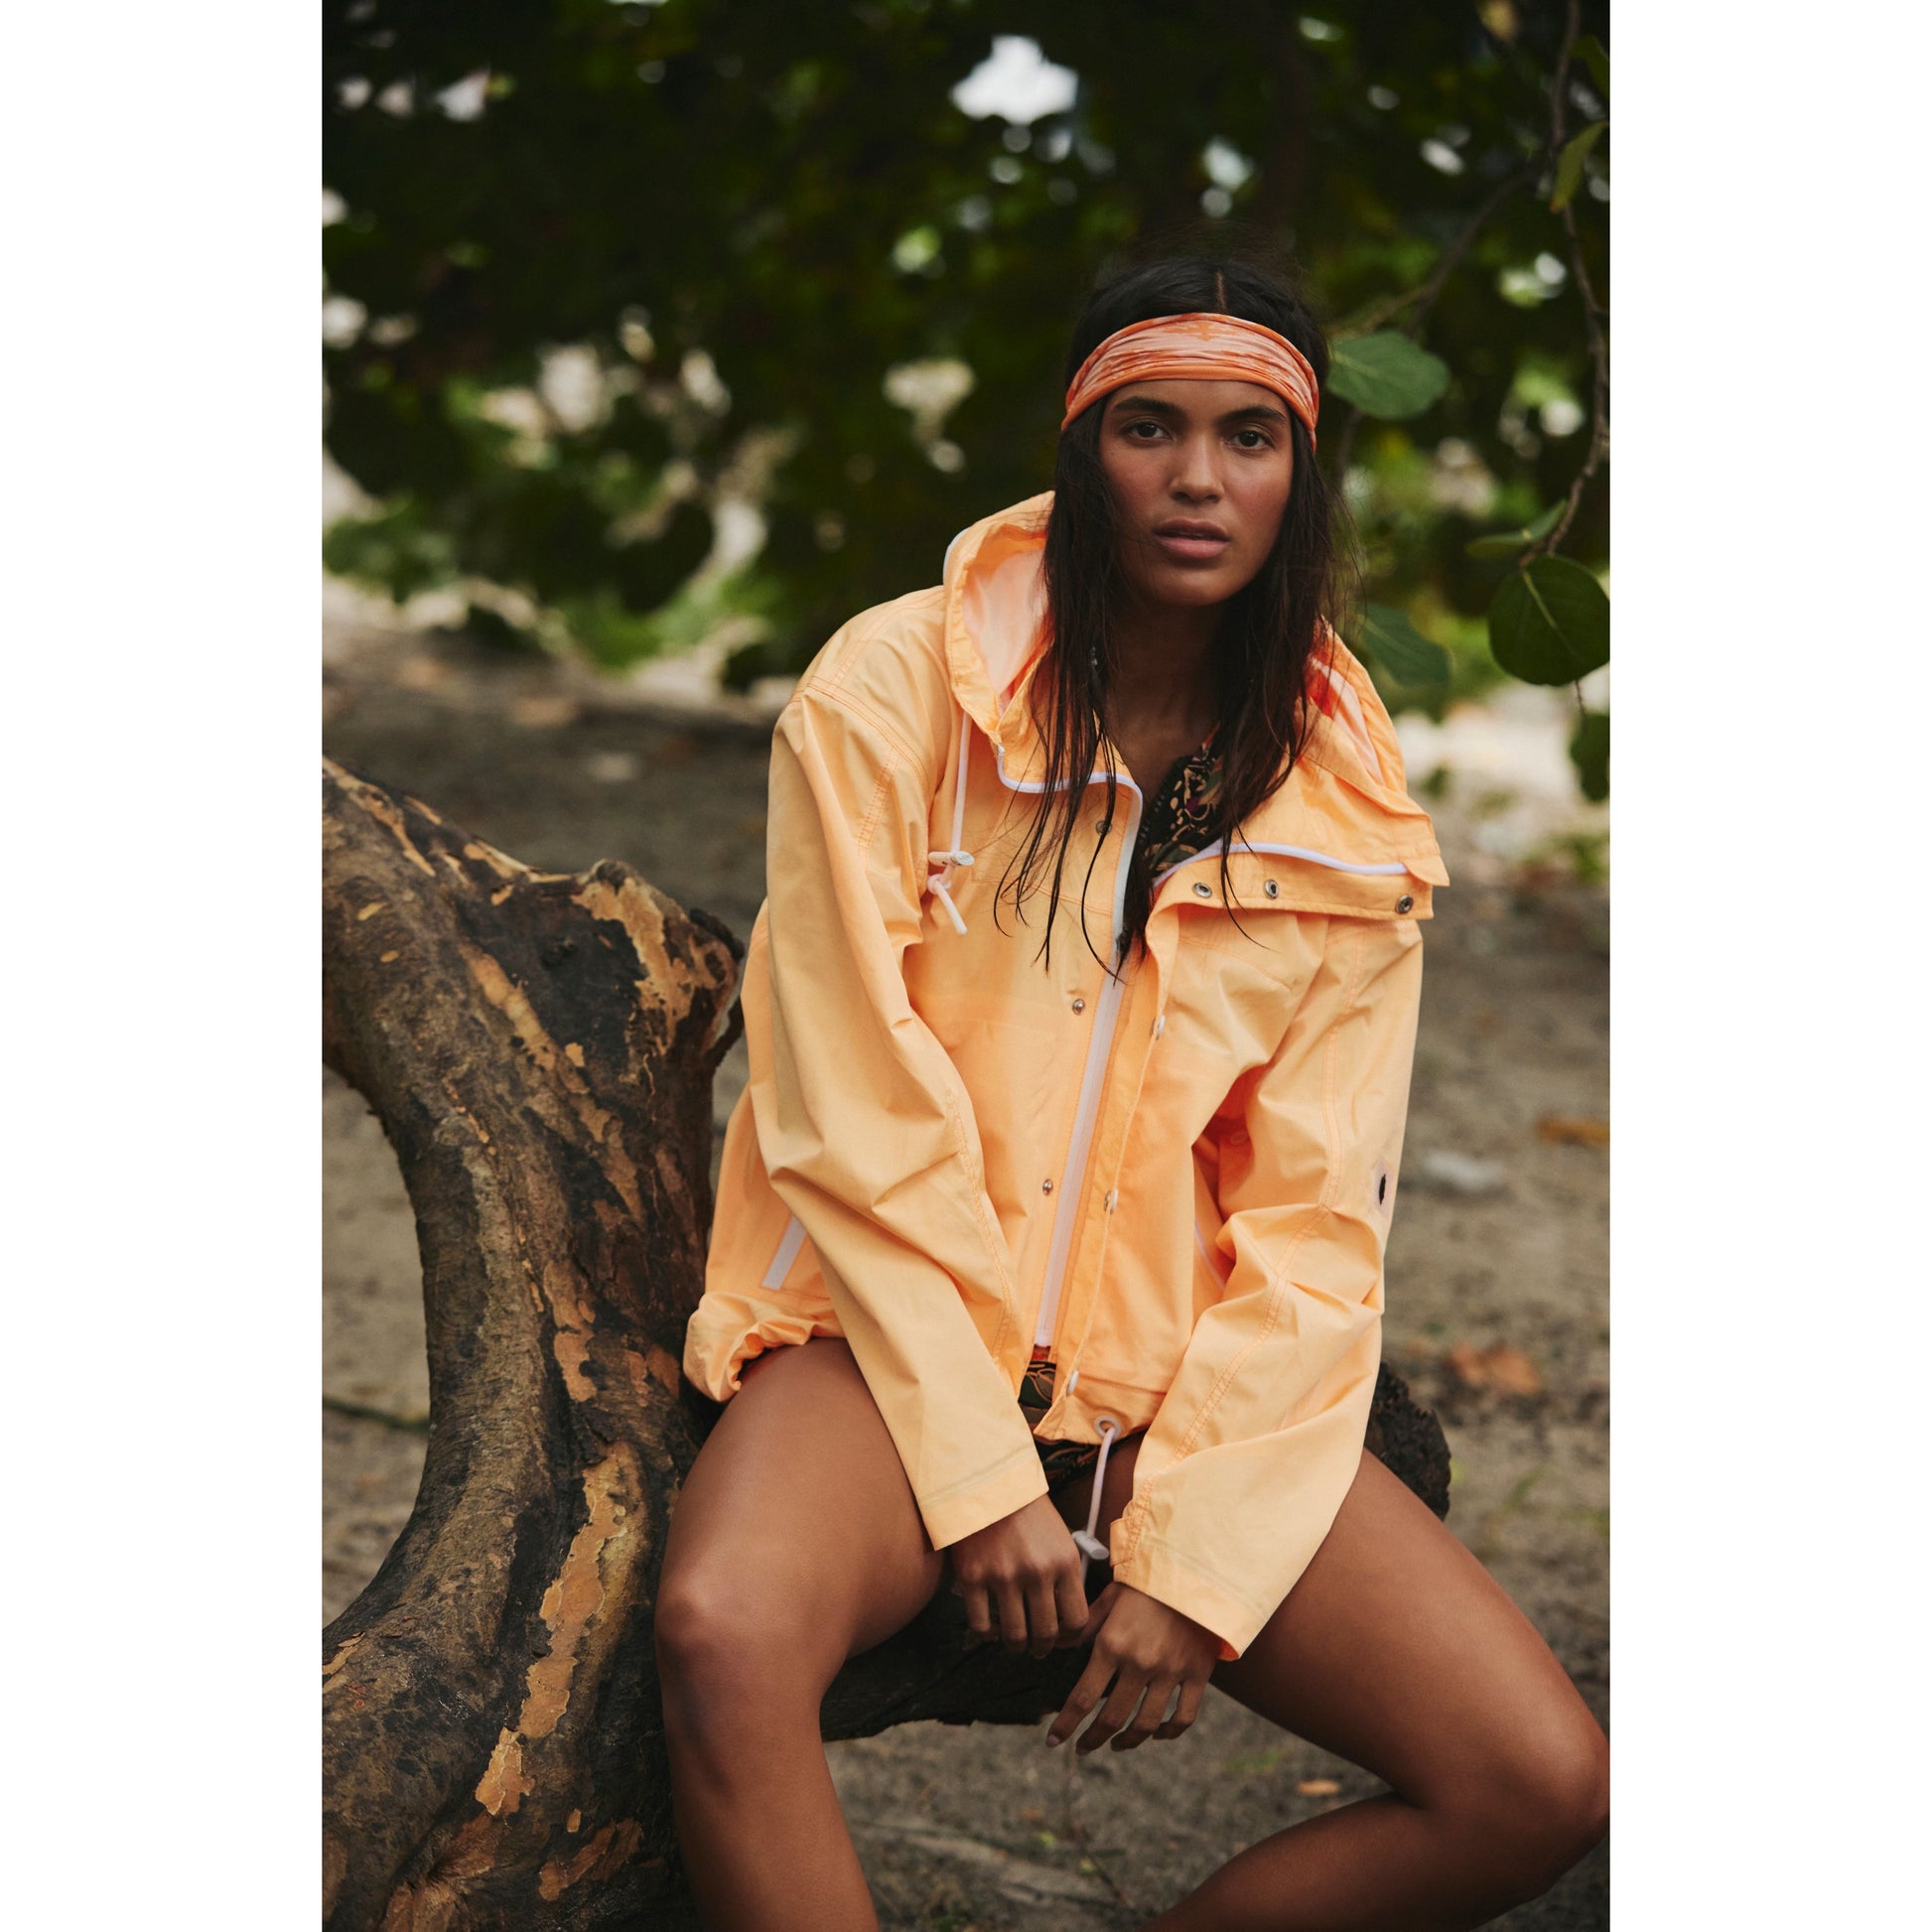 A woman in a Rain & Shine Jacket by Free People Movement and an orange headband sits on a gnarled tree trunk, looking away thoughtfully, surrounded by green foliage.